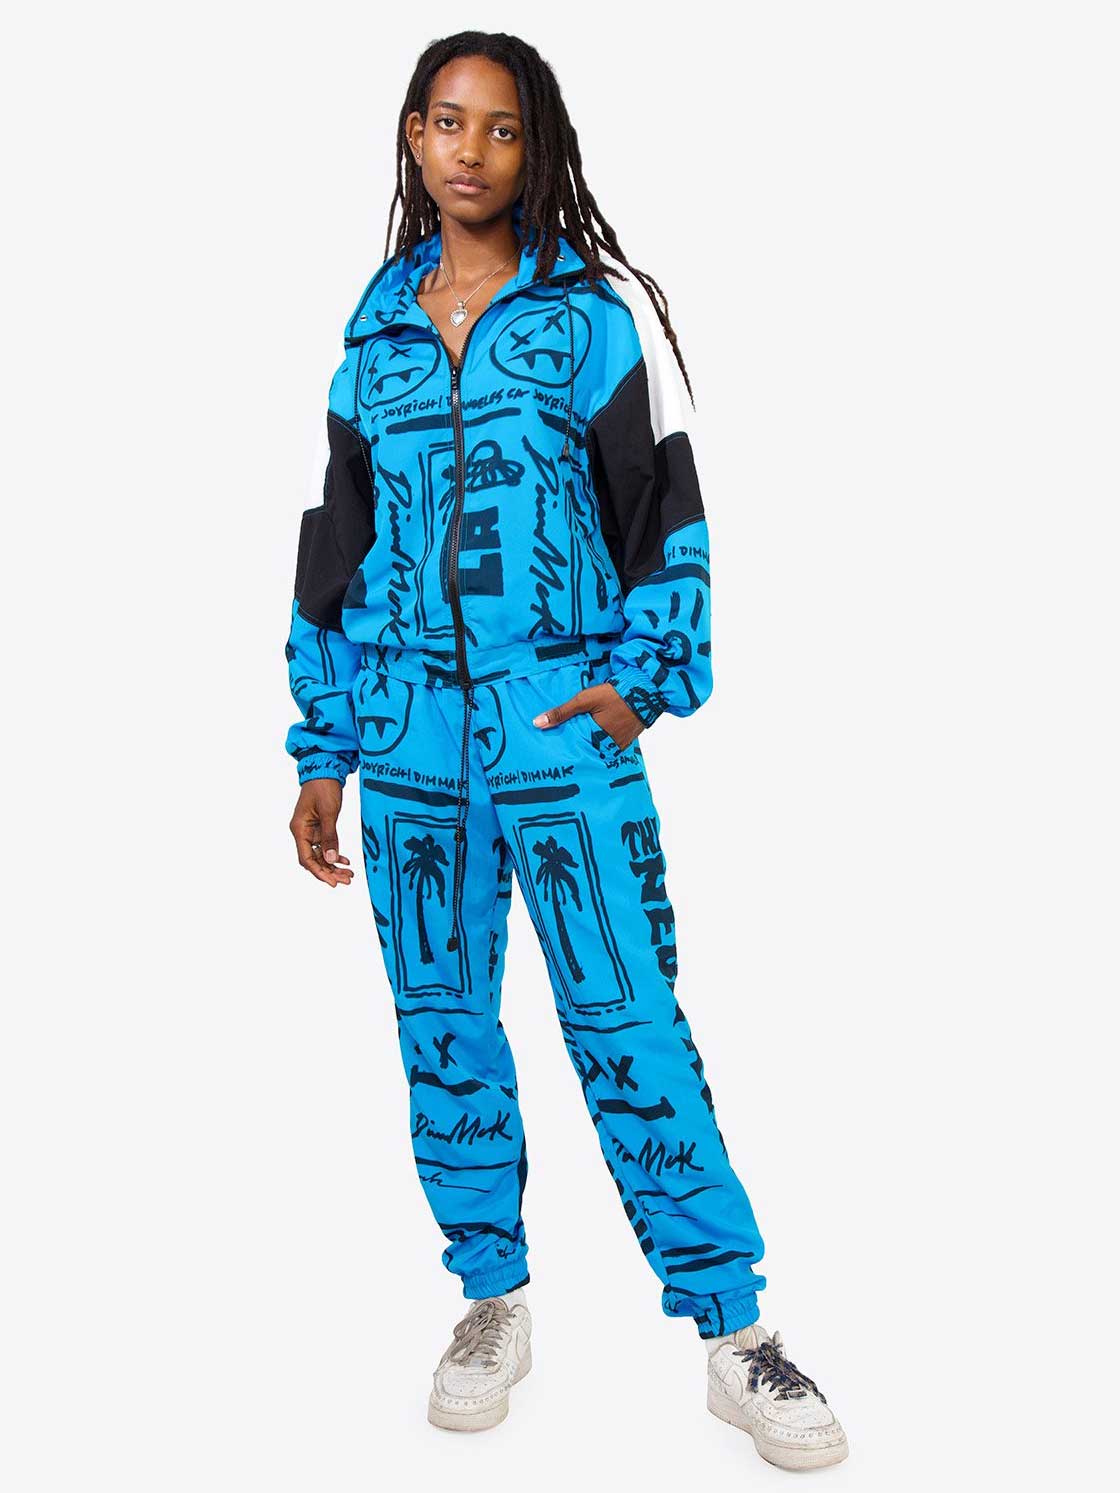 log angeles blue with black activewear two piece